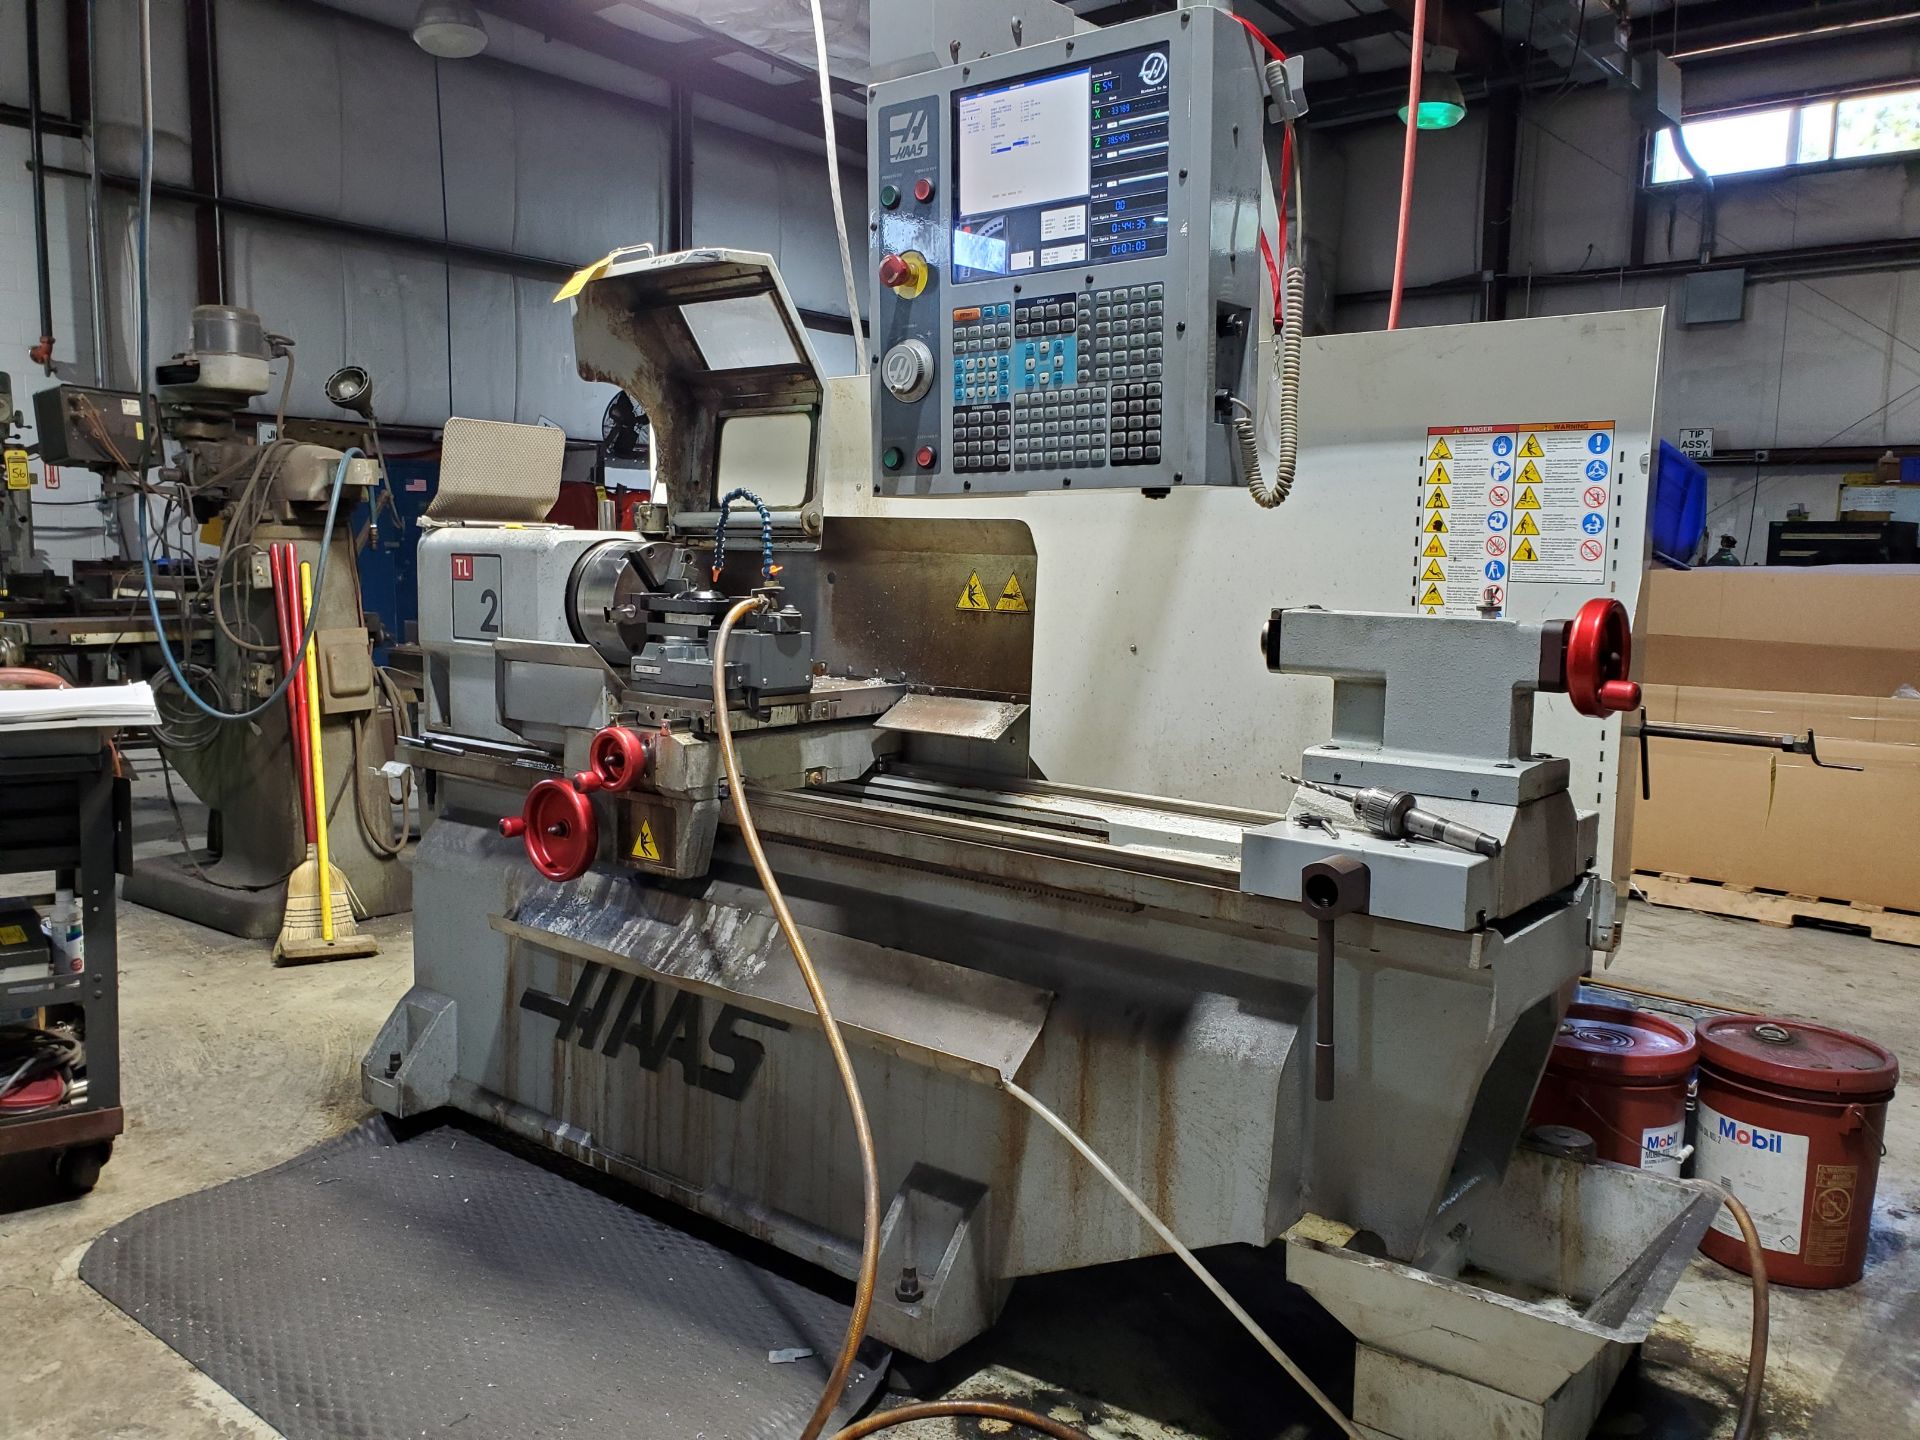 2007 HAAS T2 48 X 16 CNC LATHE, S/N 3079584, HAAS CONTROL, 6' BED, 10'' 3- JAW CHUCK, TAILSTOCK, CRO - Image 2 of 11